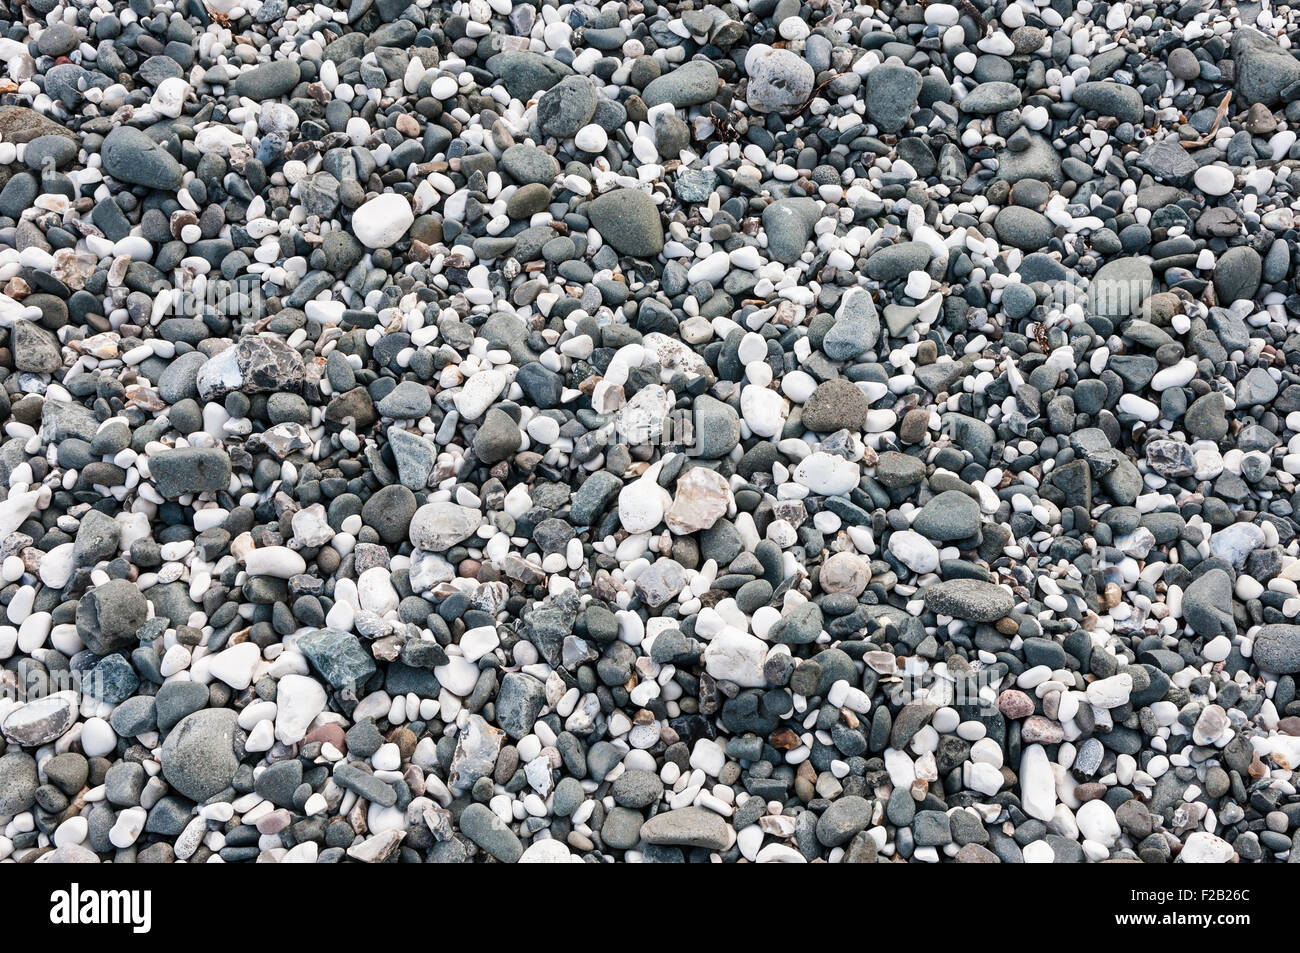 Pebbles of various sizes on a beach. Stock Photo